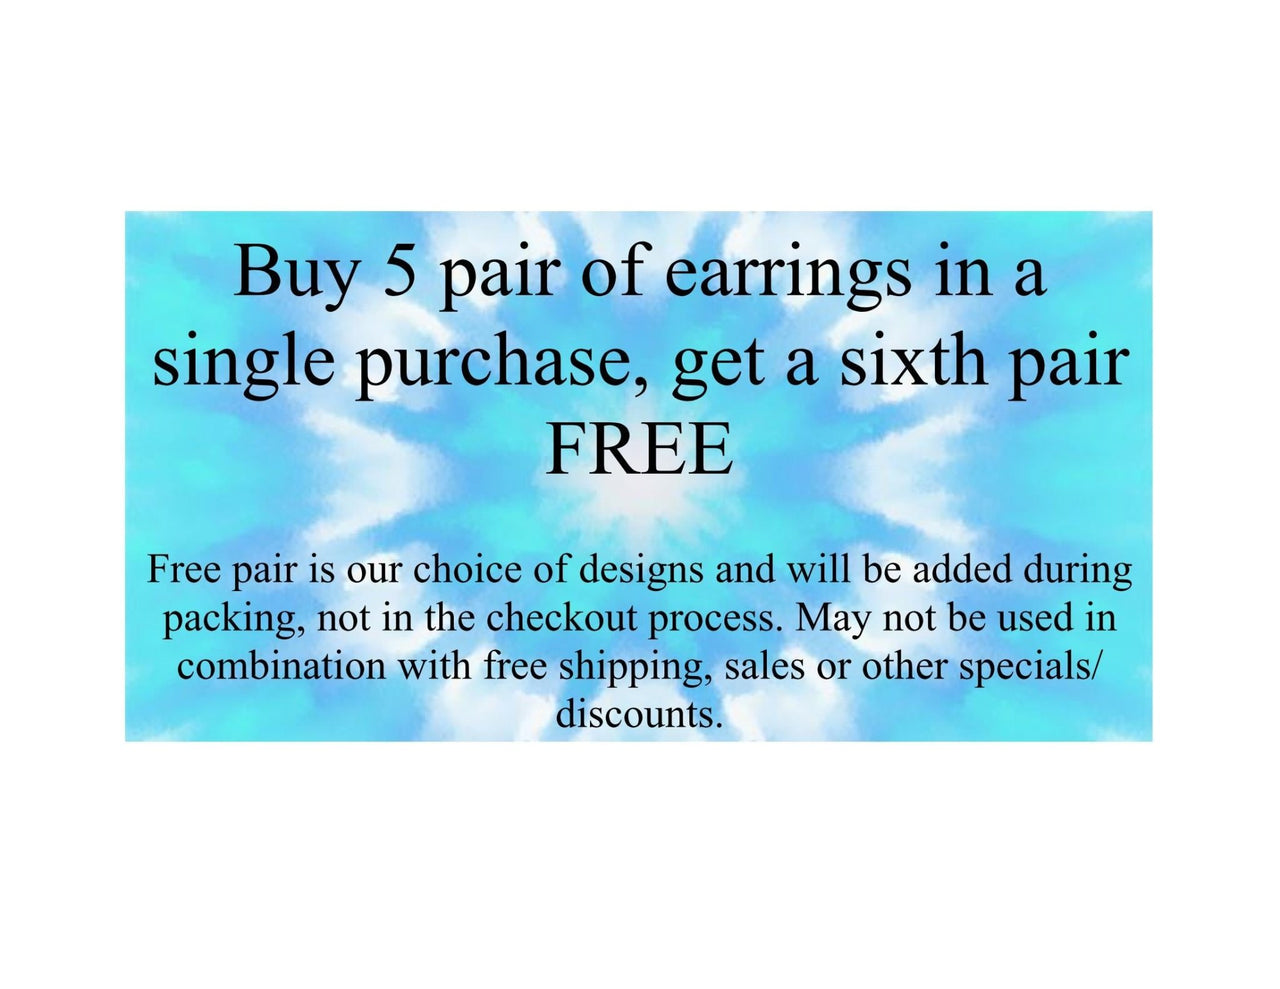 Buy 5 pair of earrings, get a 6th pair free offer from www.brockuscreations2.com